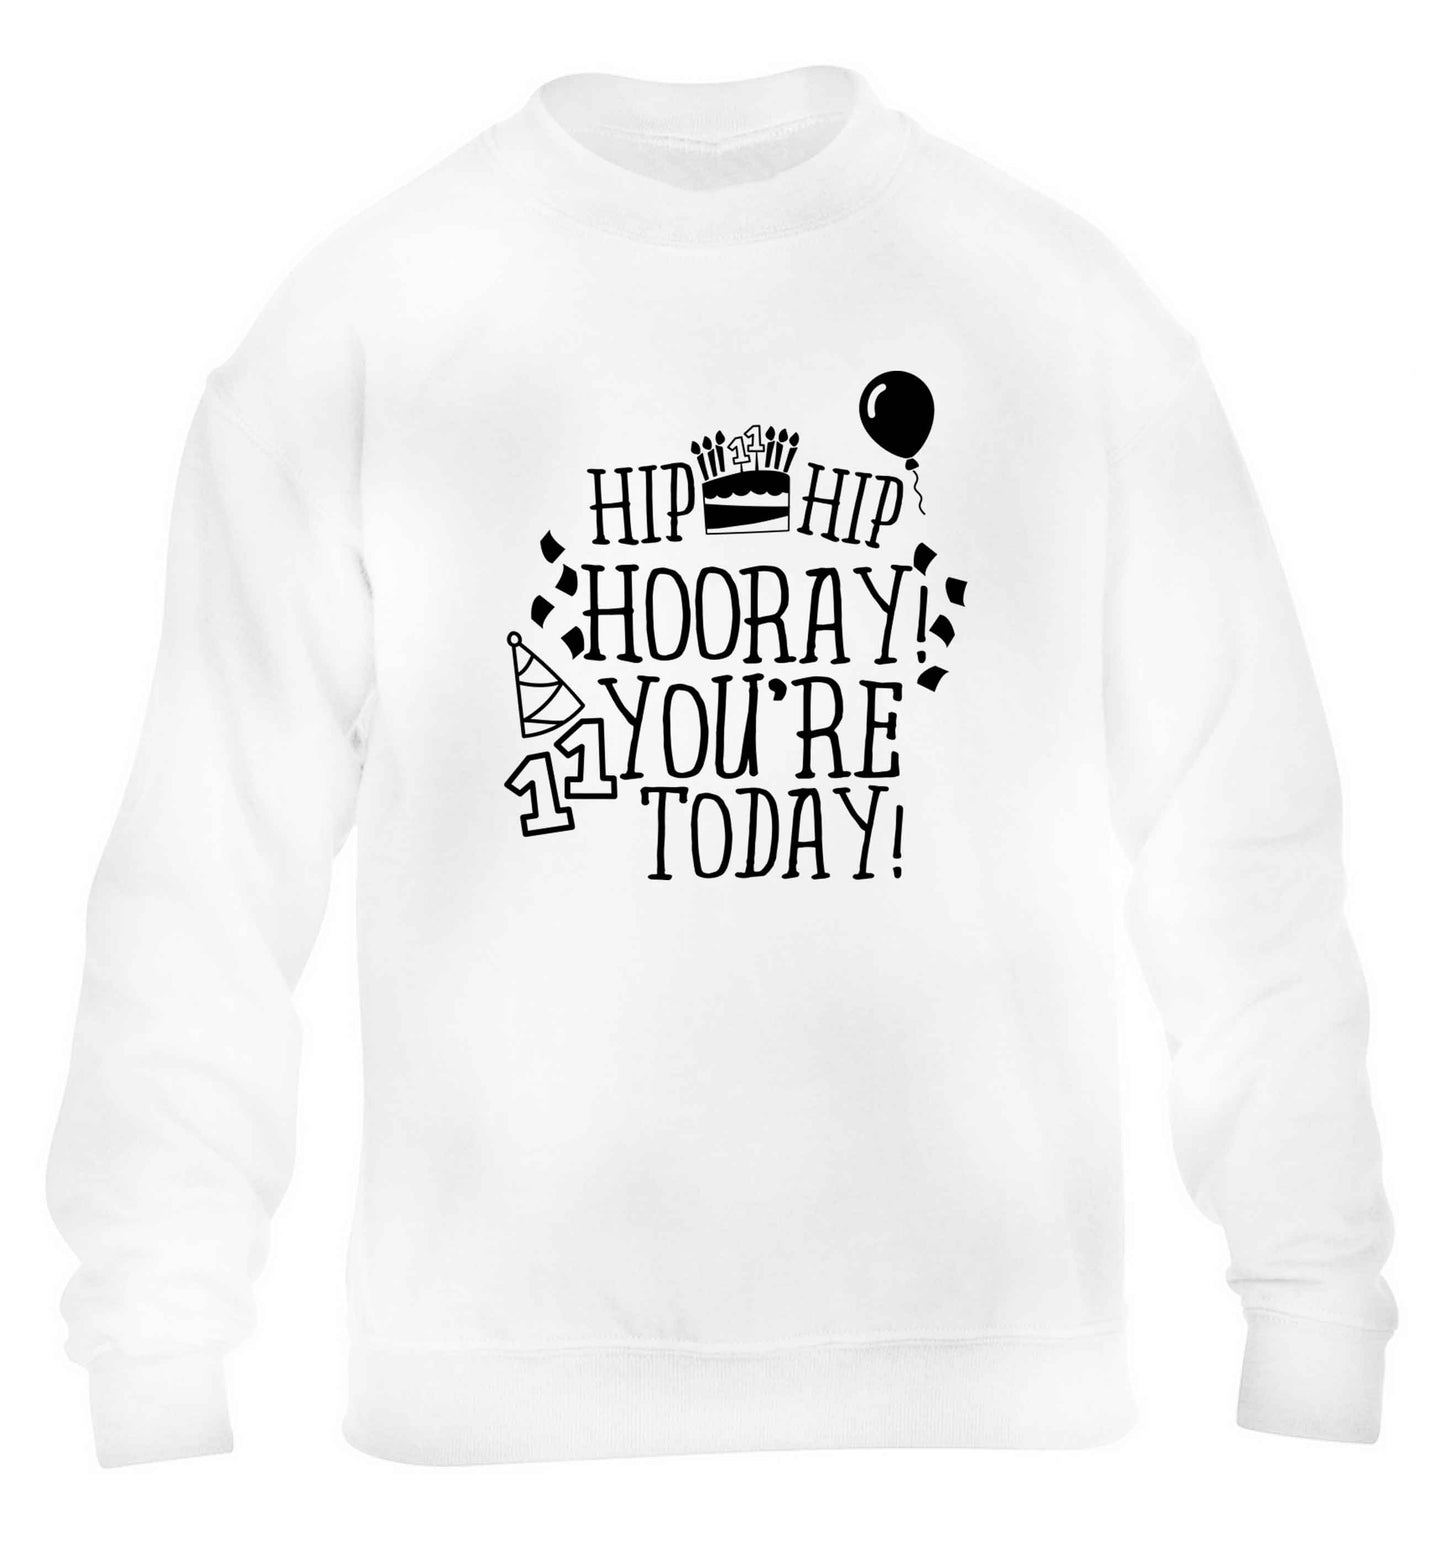 Hip hip hooray I you're eleven today! children's white sweater 12-13 Years